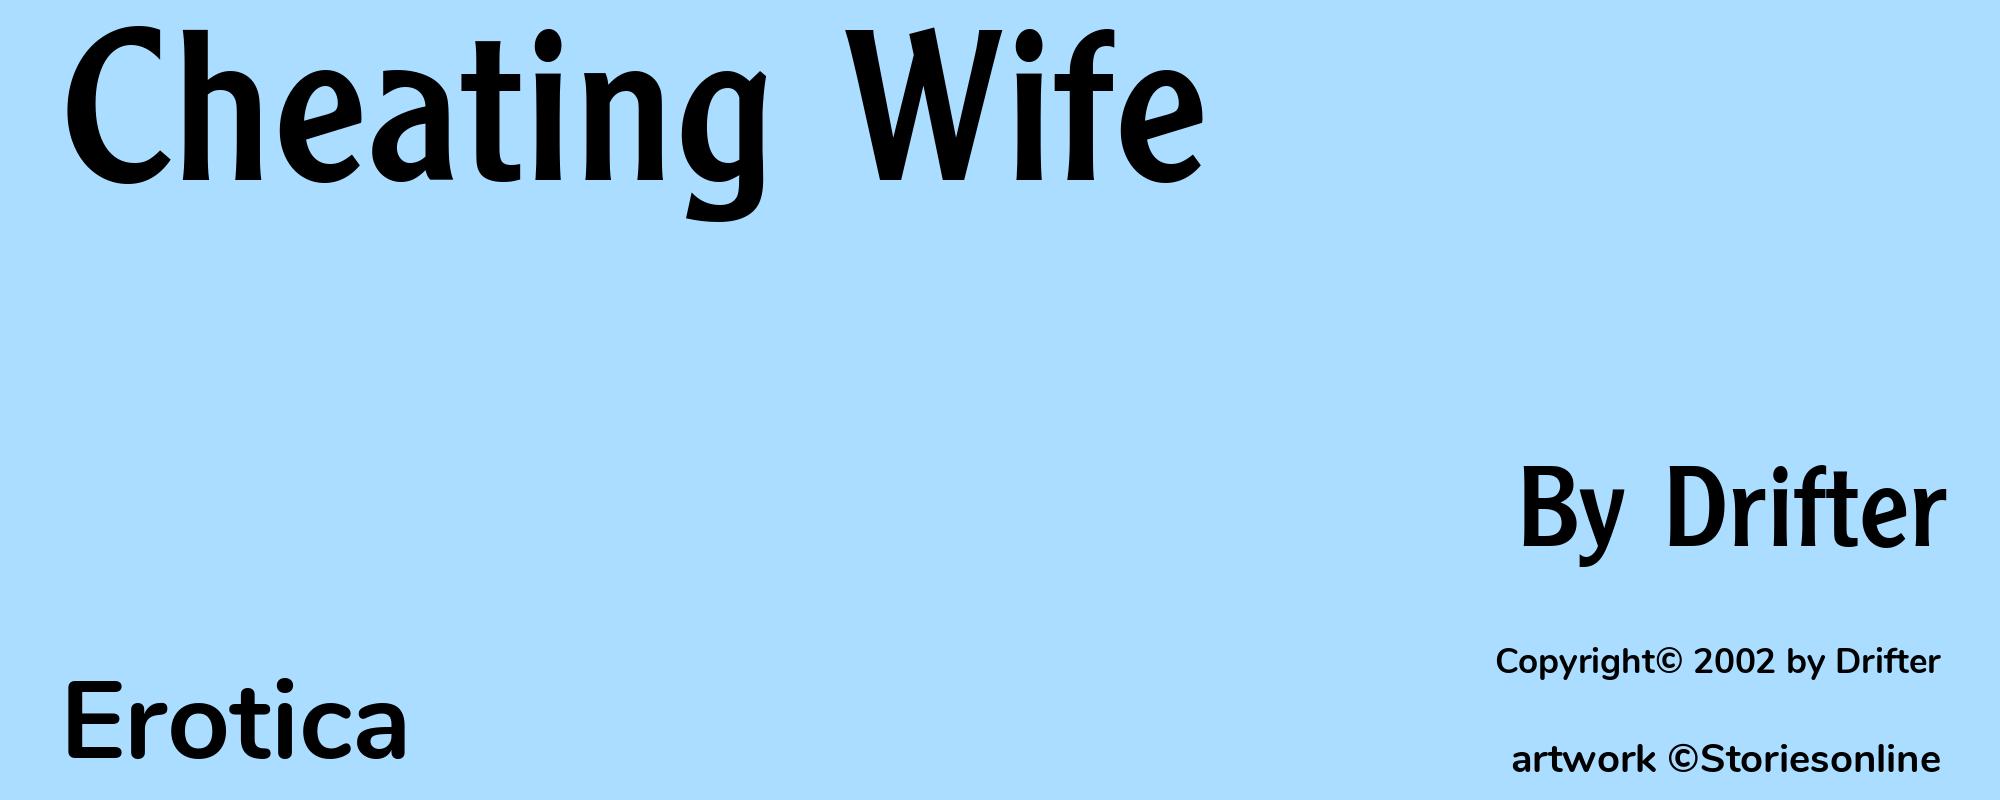 Cheating Wife - Cover